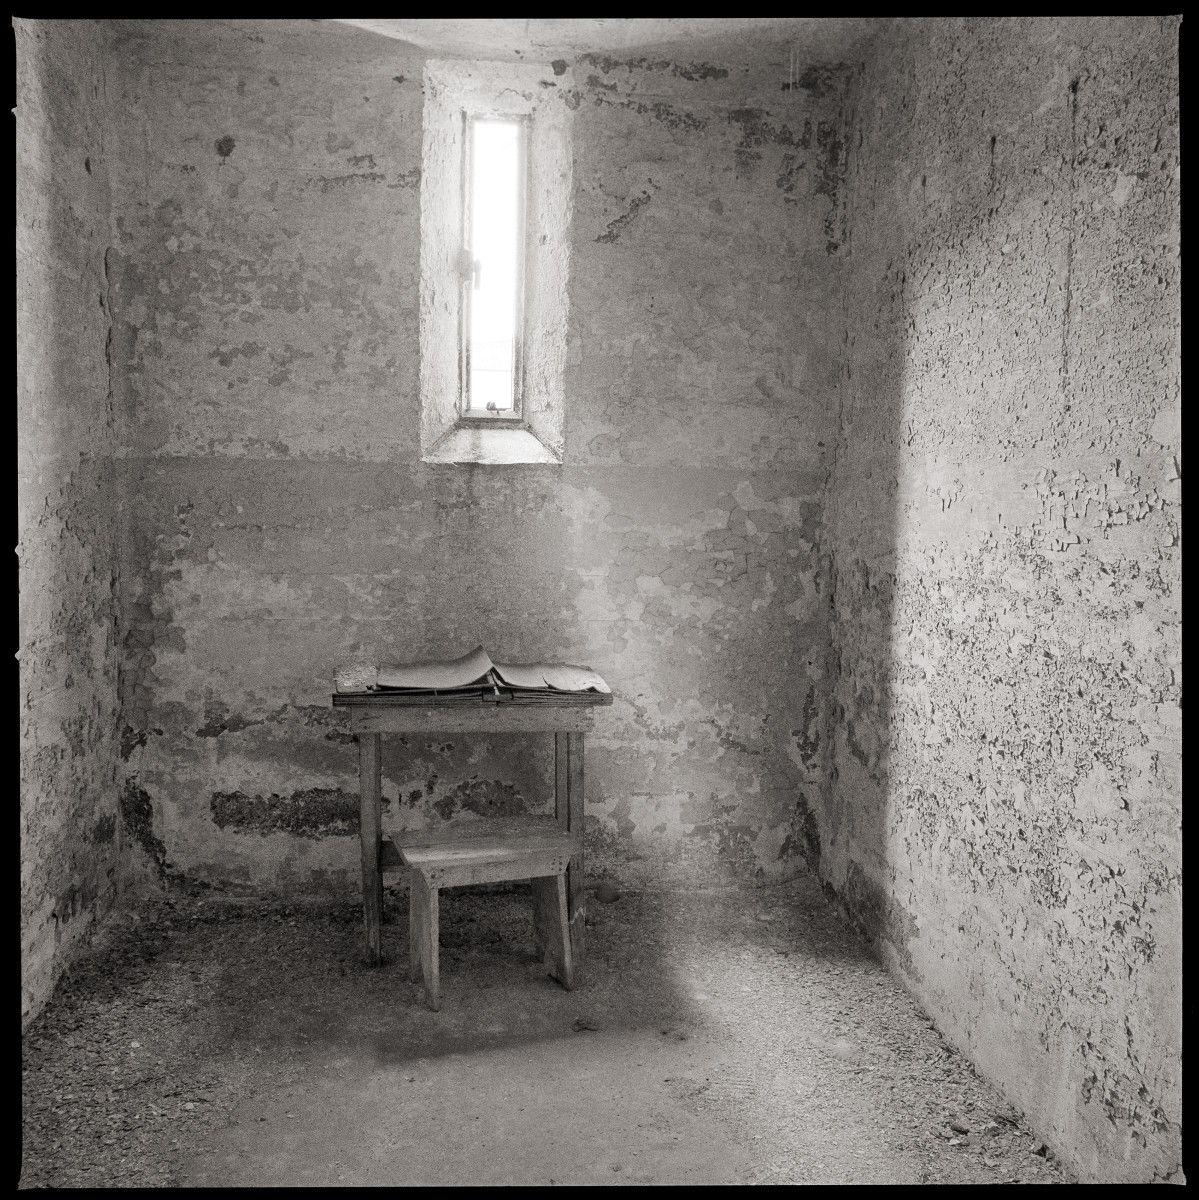 Divine Intervention by Eric T. Kunsman  Image: ID: A black and white image shows a desk below a window in an otherwise empty room.  The paint on the wall is cracked.  There is a beam of light coming through the window.